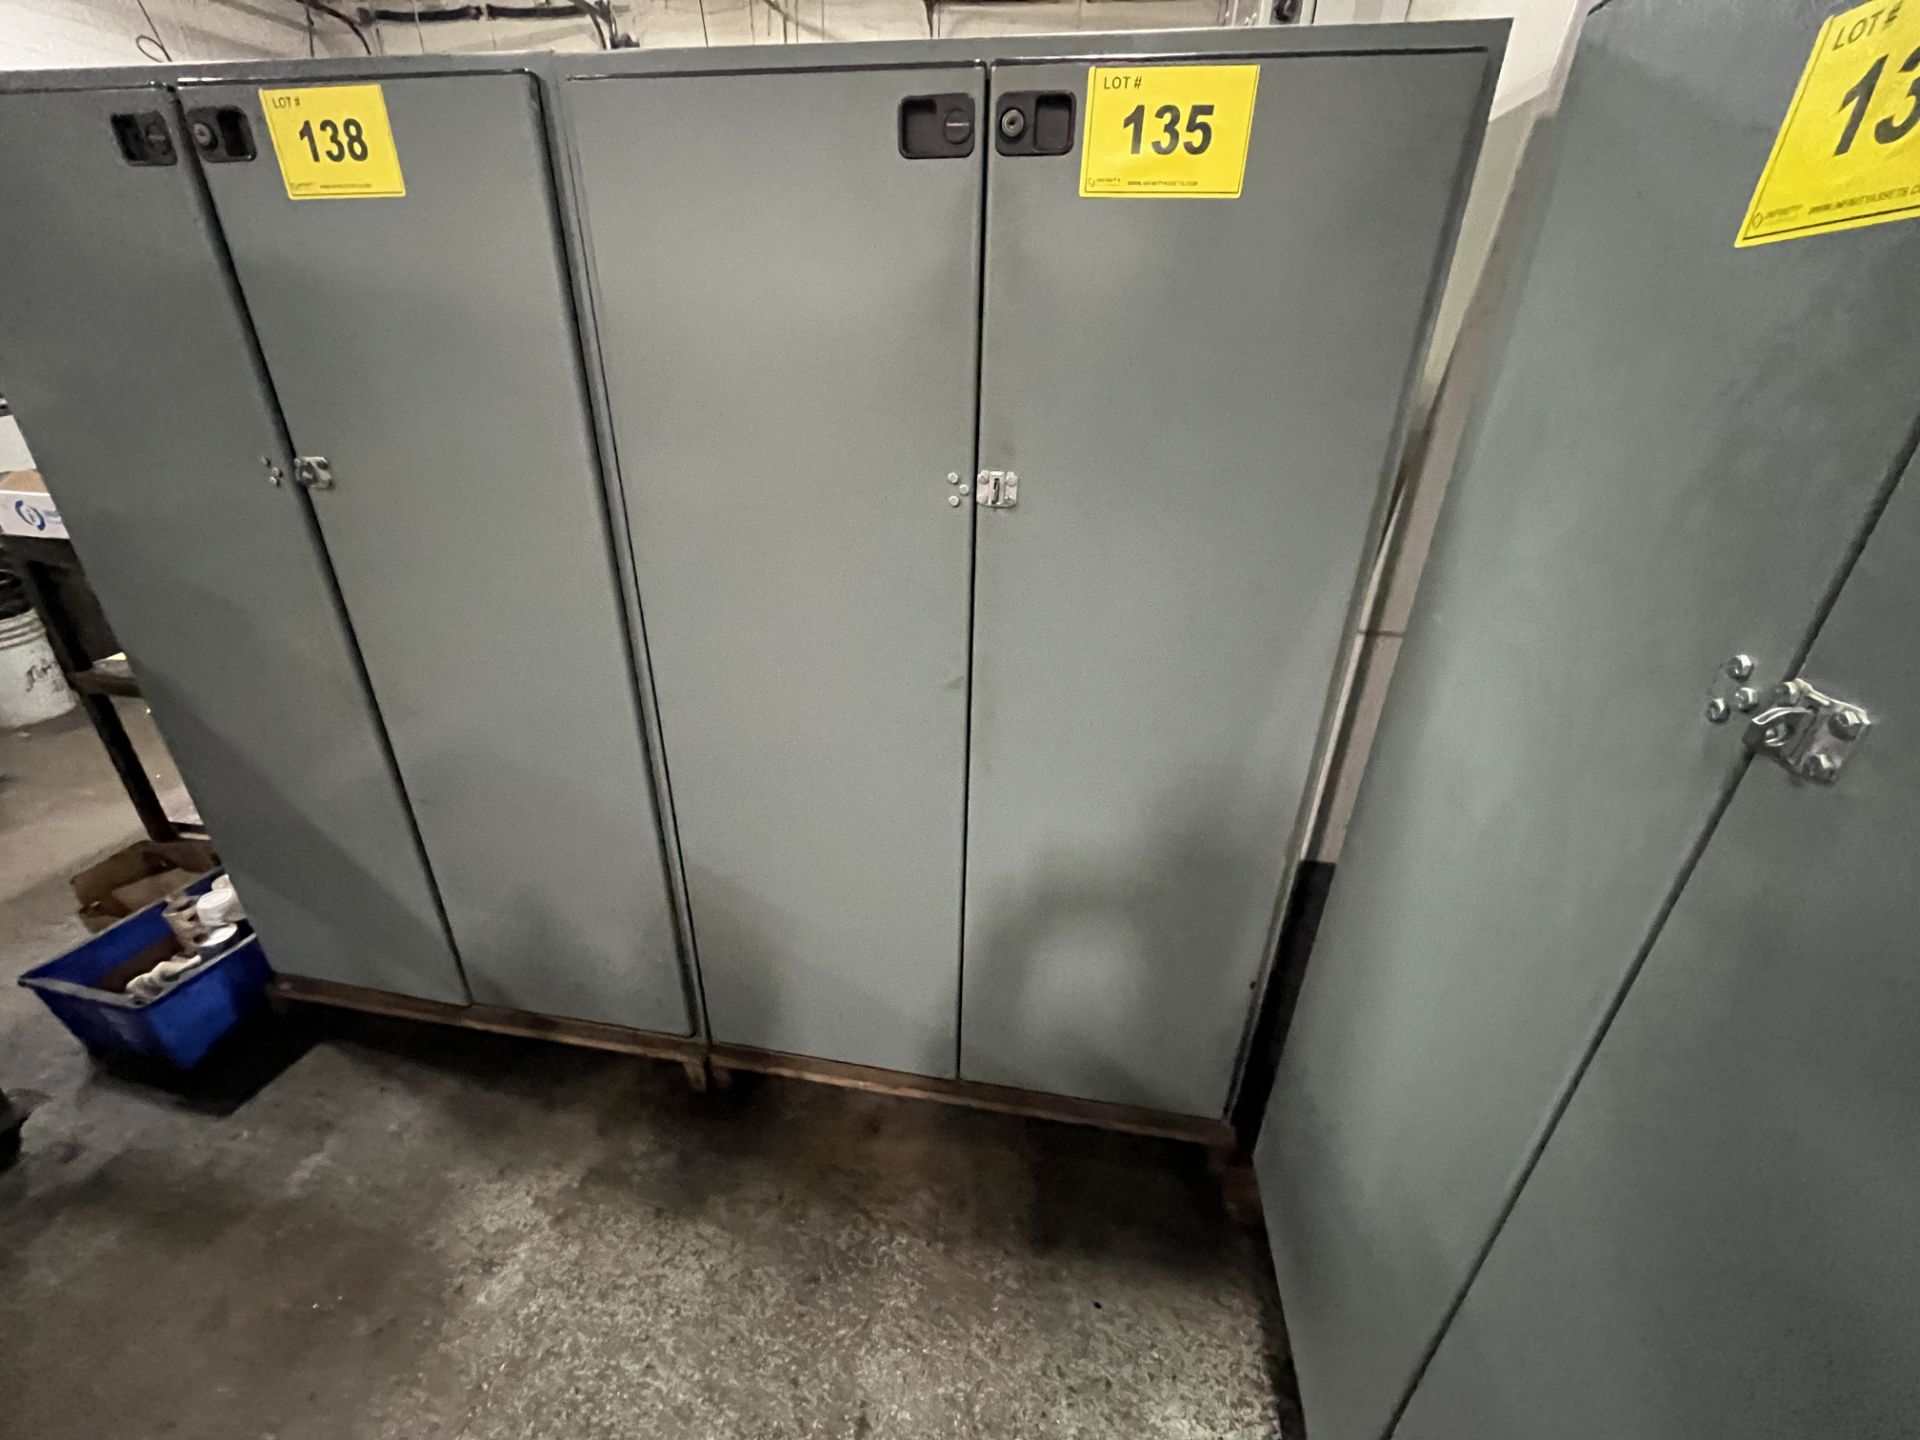 SUNAR HAUSERMAN TOOL CABINET W/ 72-SLOT PIGEON HOLE CABINET, CONTENTS, DRILL BITS, ETC. - Image 2 of 2